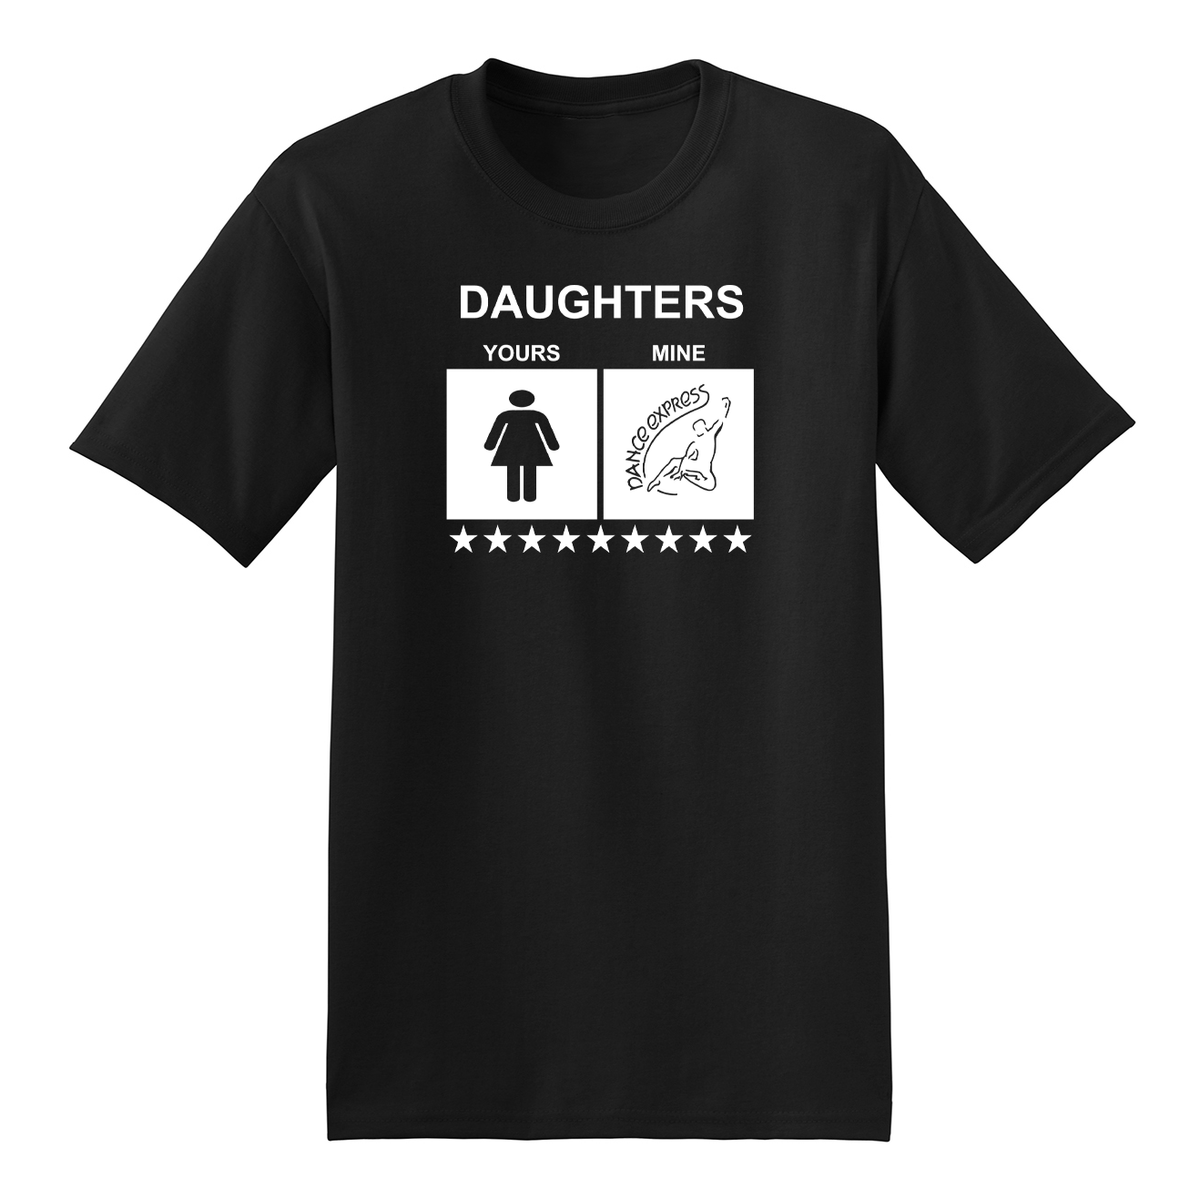 "Daughters" Dance Express of Tolland T-Shirt